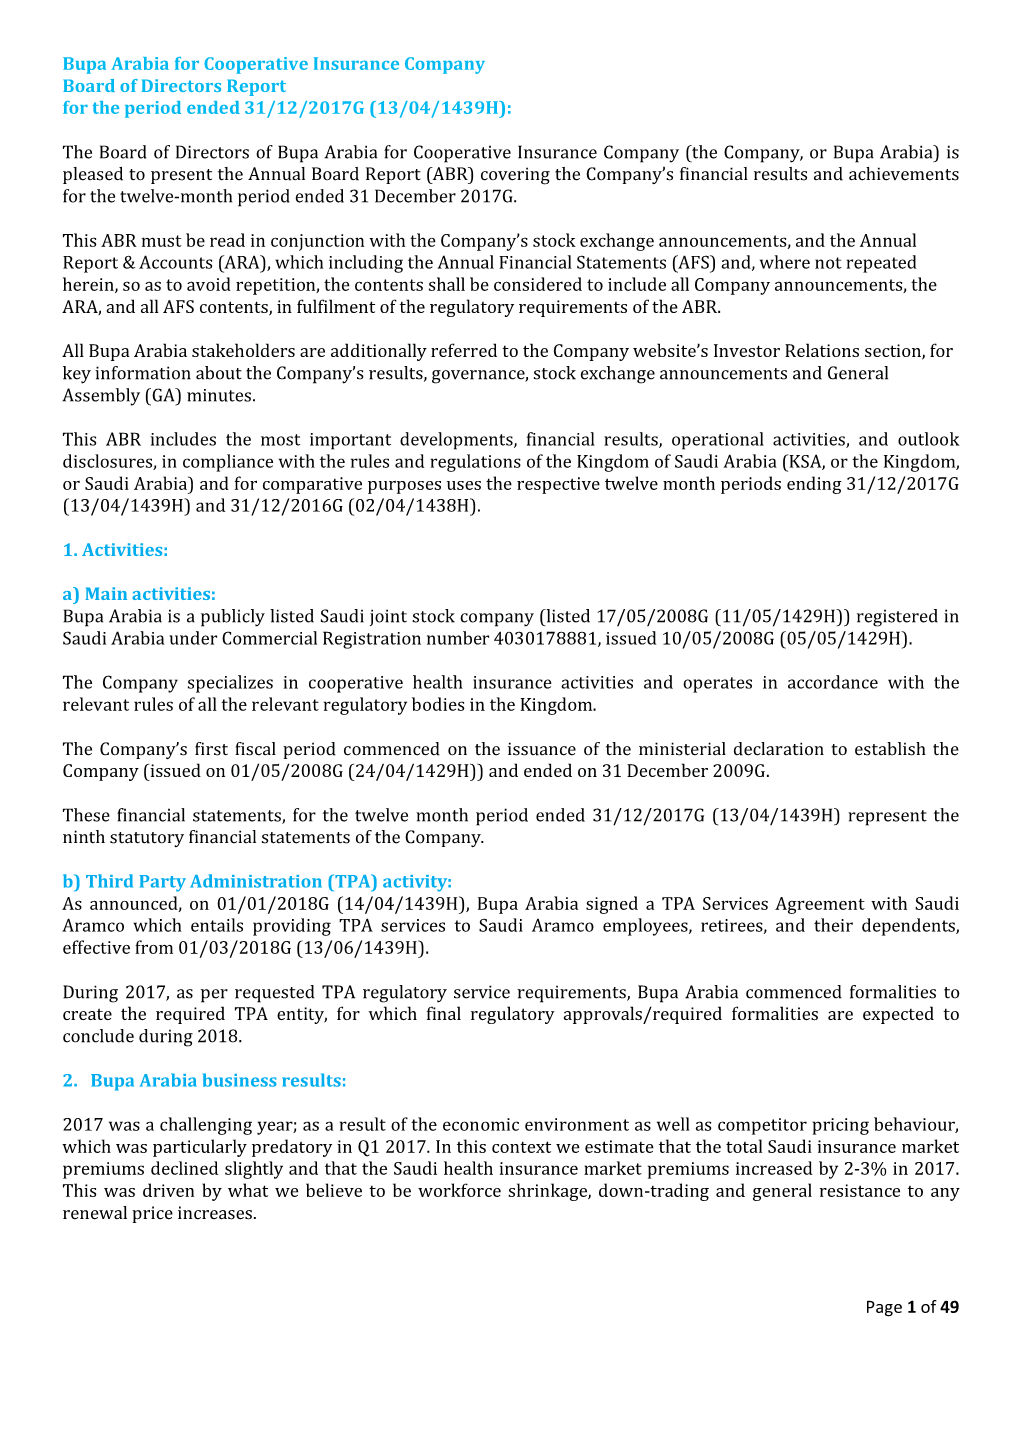 Page 1 of 49 Bupa Arabia for Cooperative Insurance Company